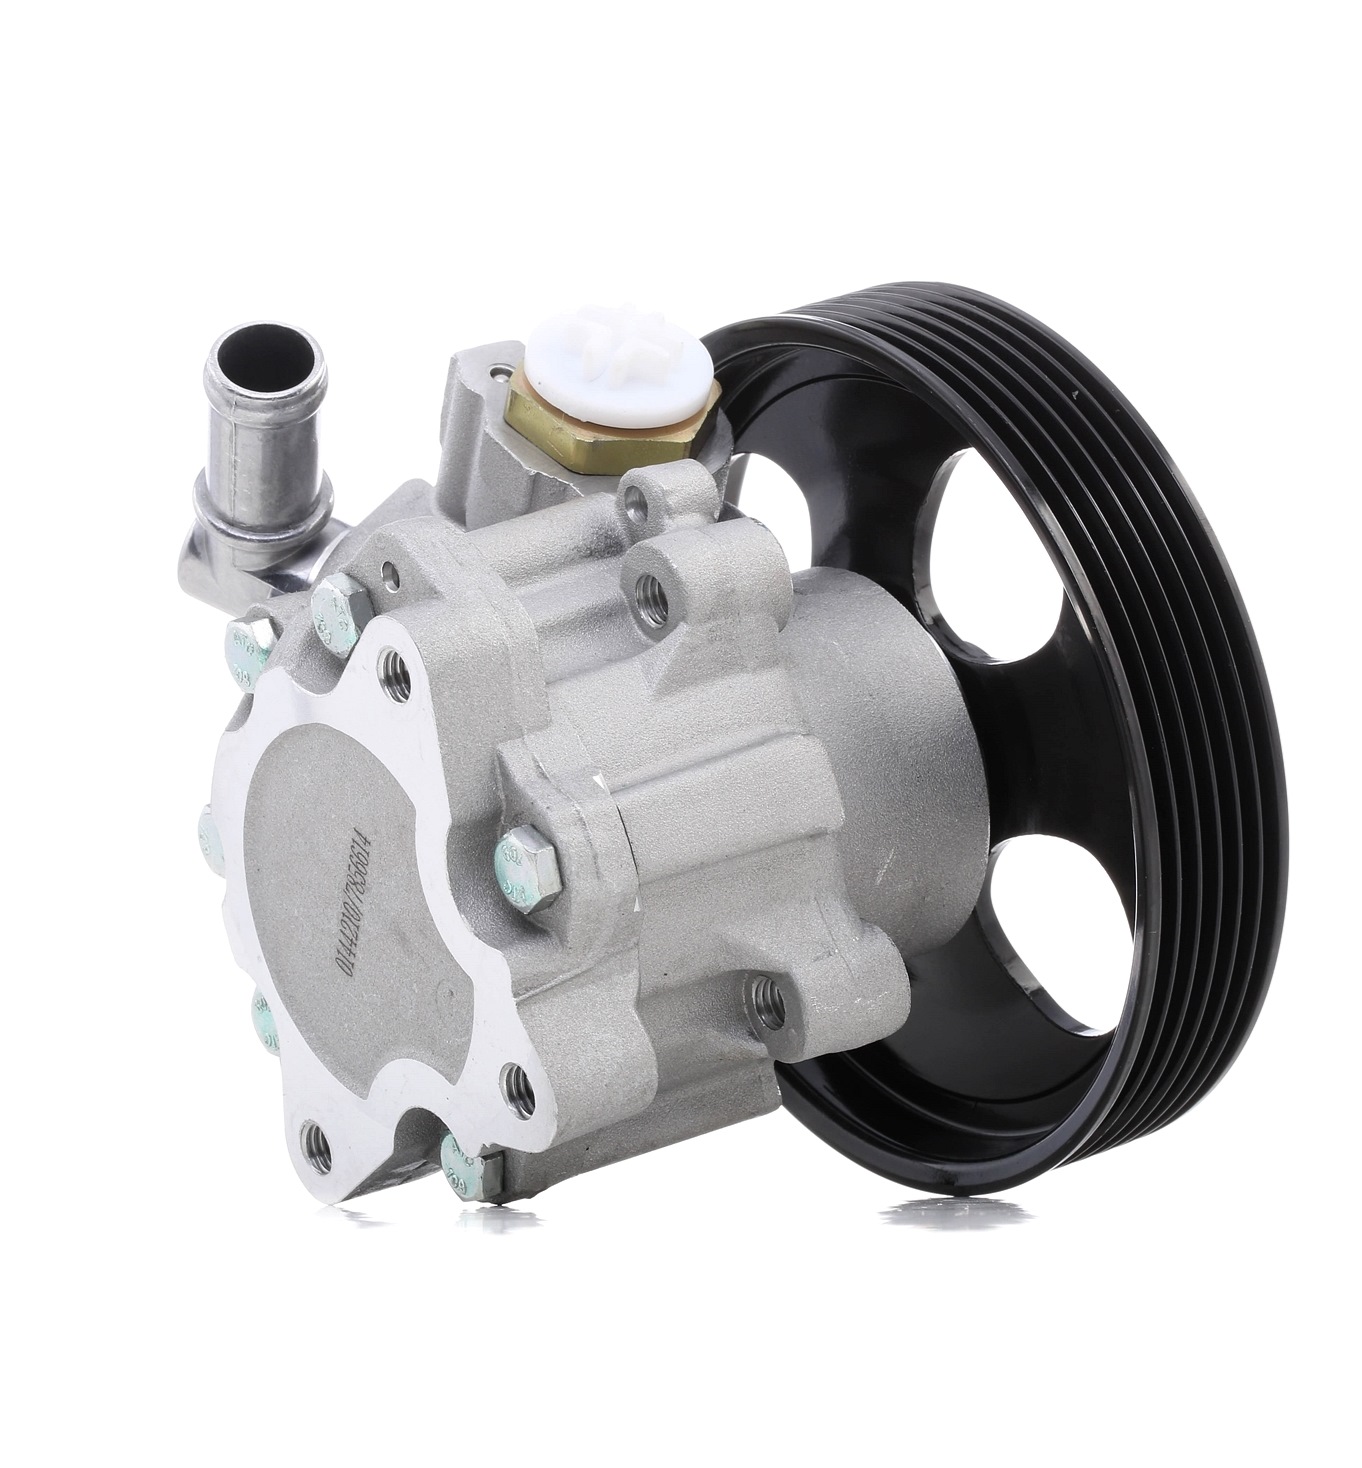 STARK SKHP-0540019 Power steering pump Hydraulic, 100 bar, Number of ribs: 6, Belt Pulley Ø: 125 mm, 70 l/h